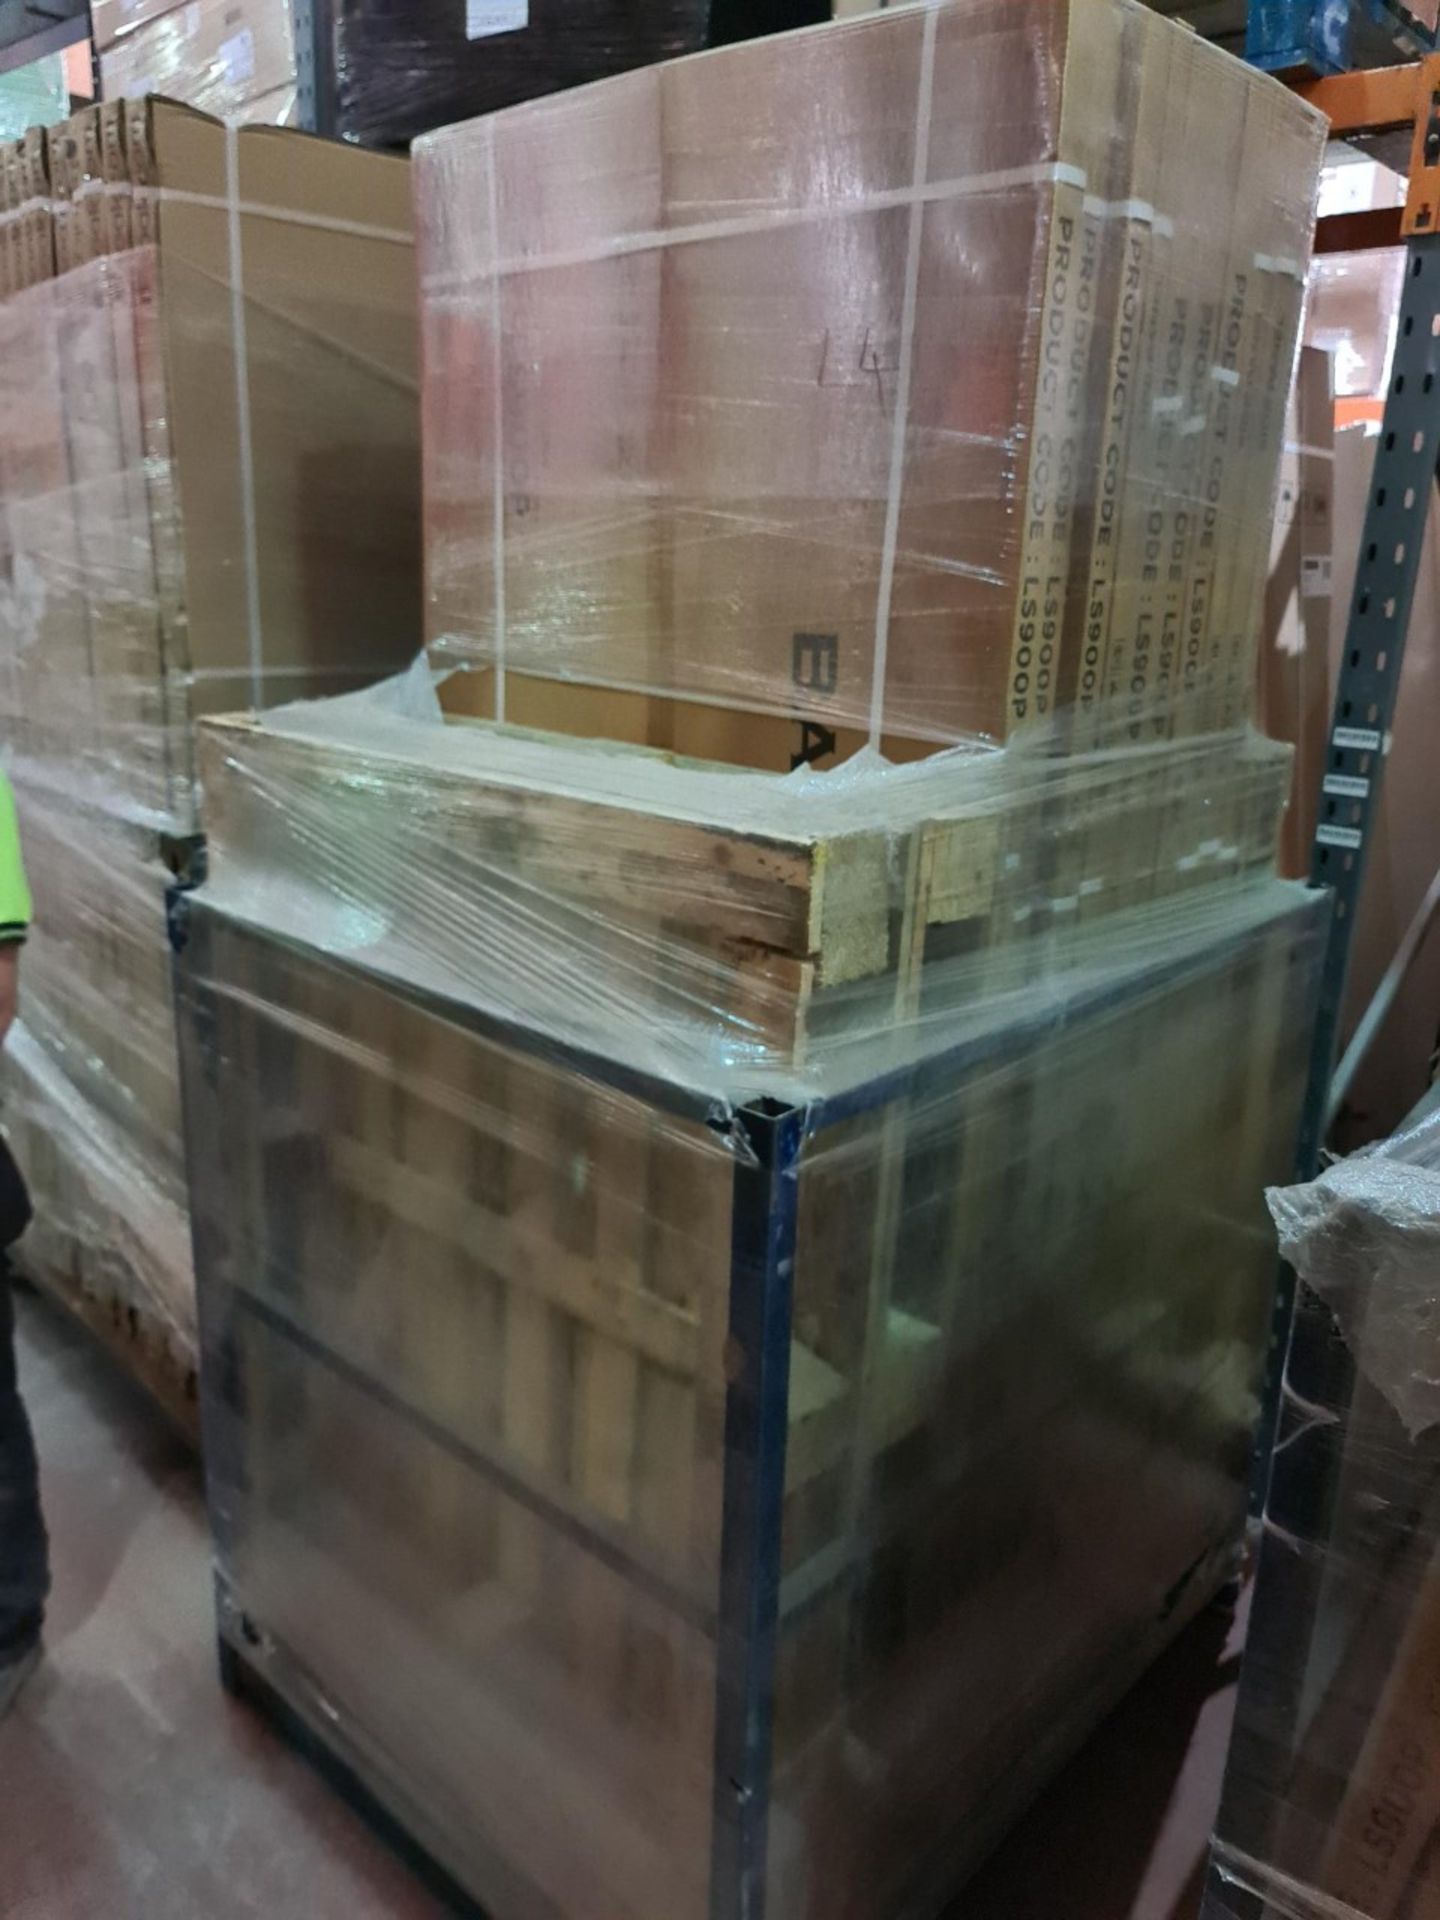 (L4) PALLET TO CONTAIN 10 x NEW BOXED BATH EMPIRE 900MM WETROOM/SIDE PANELS. RRP £399 EACH